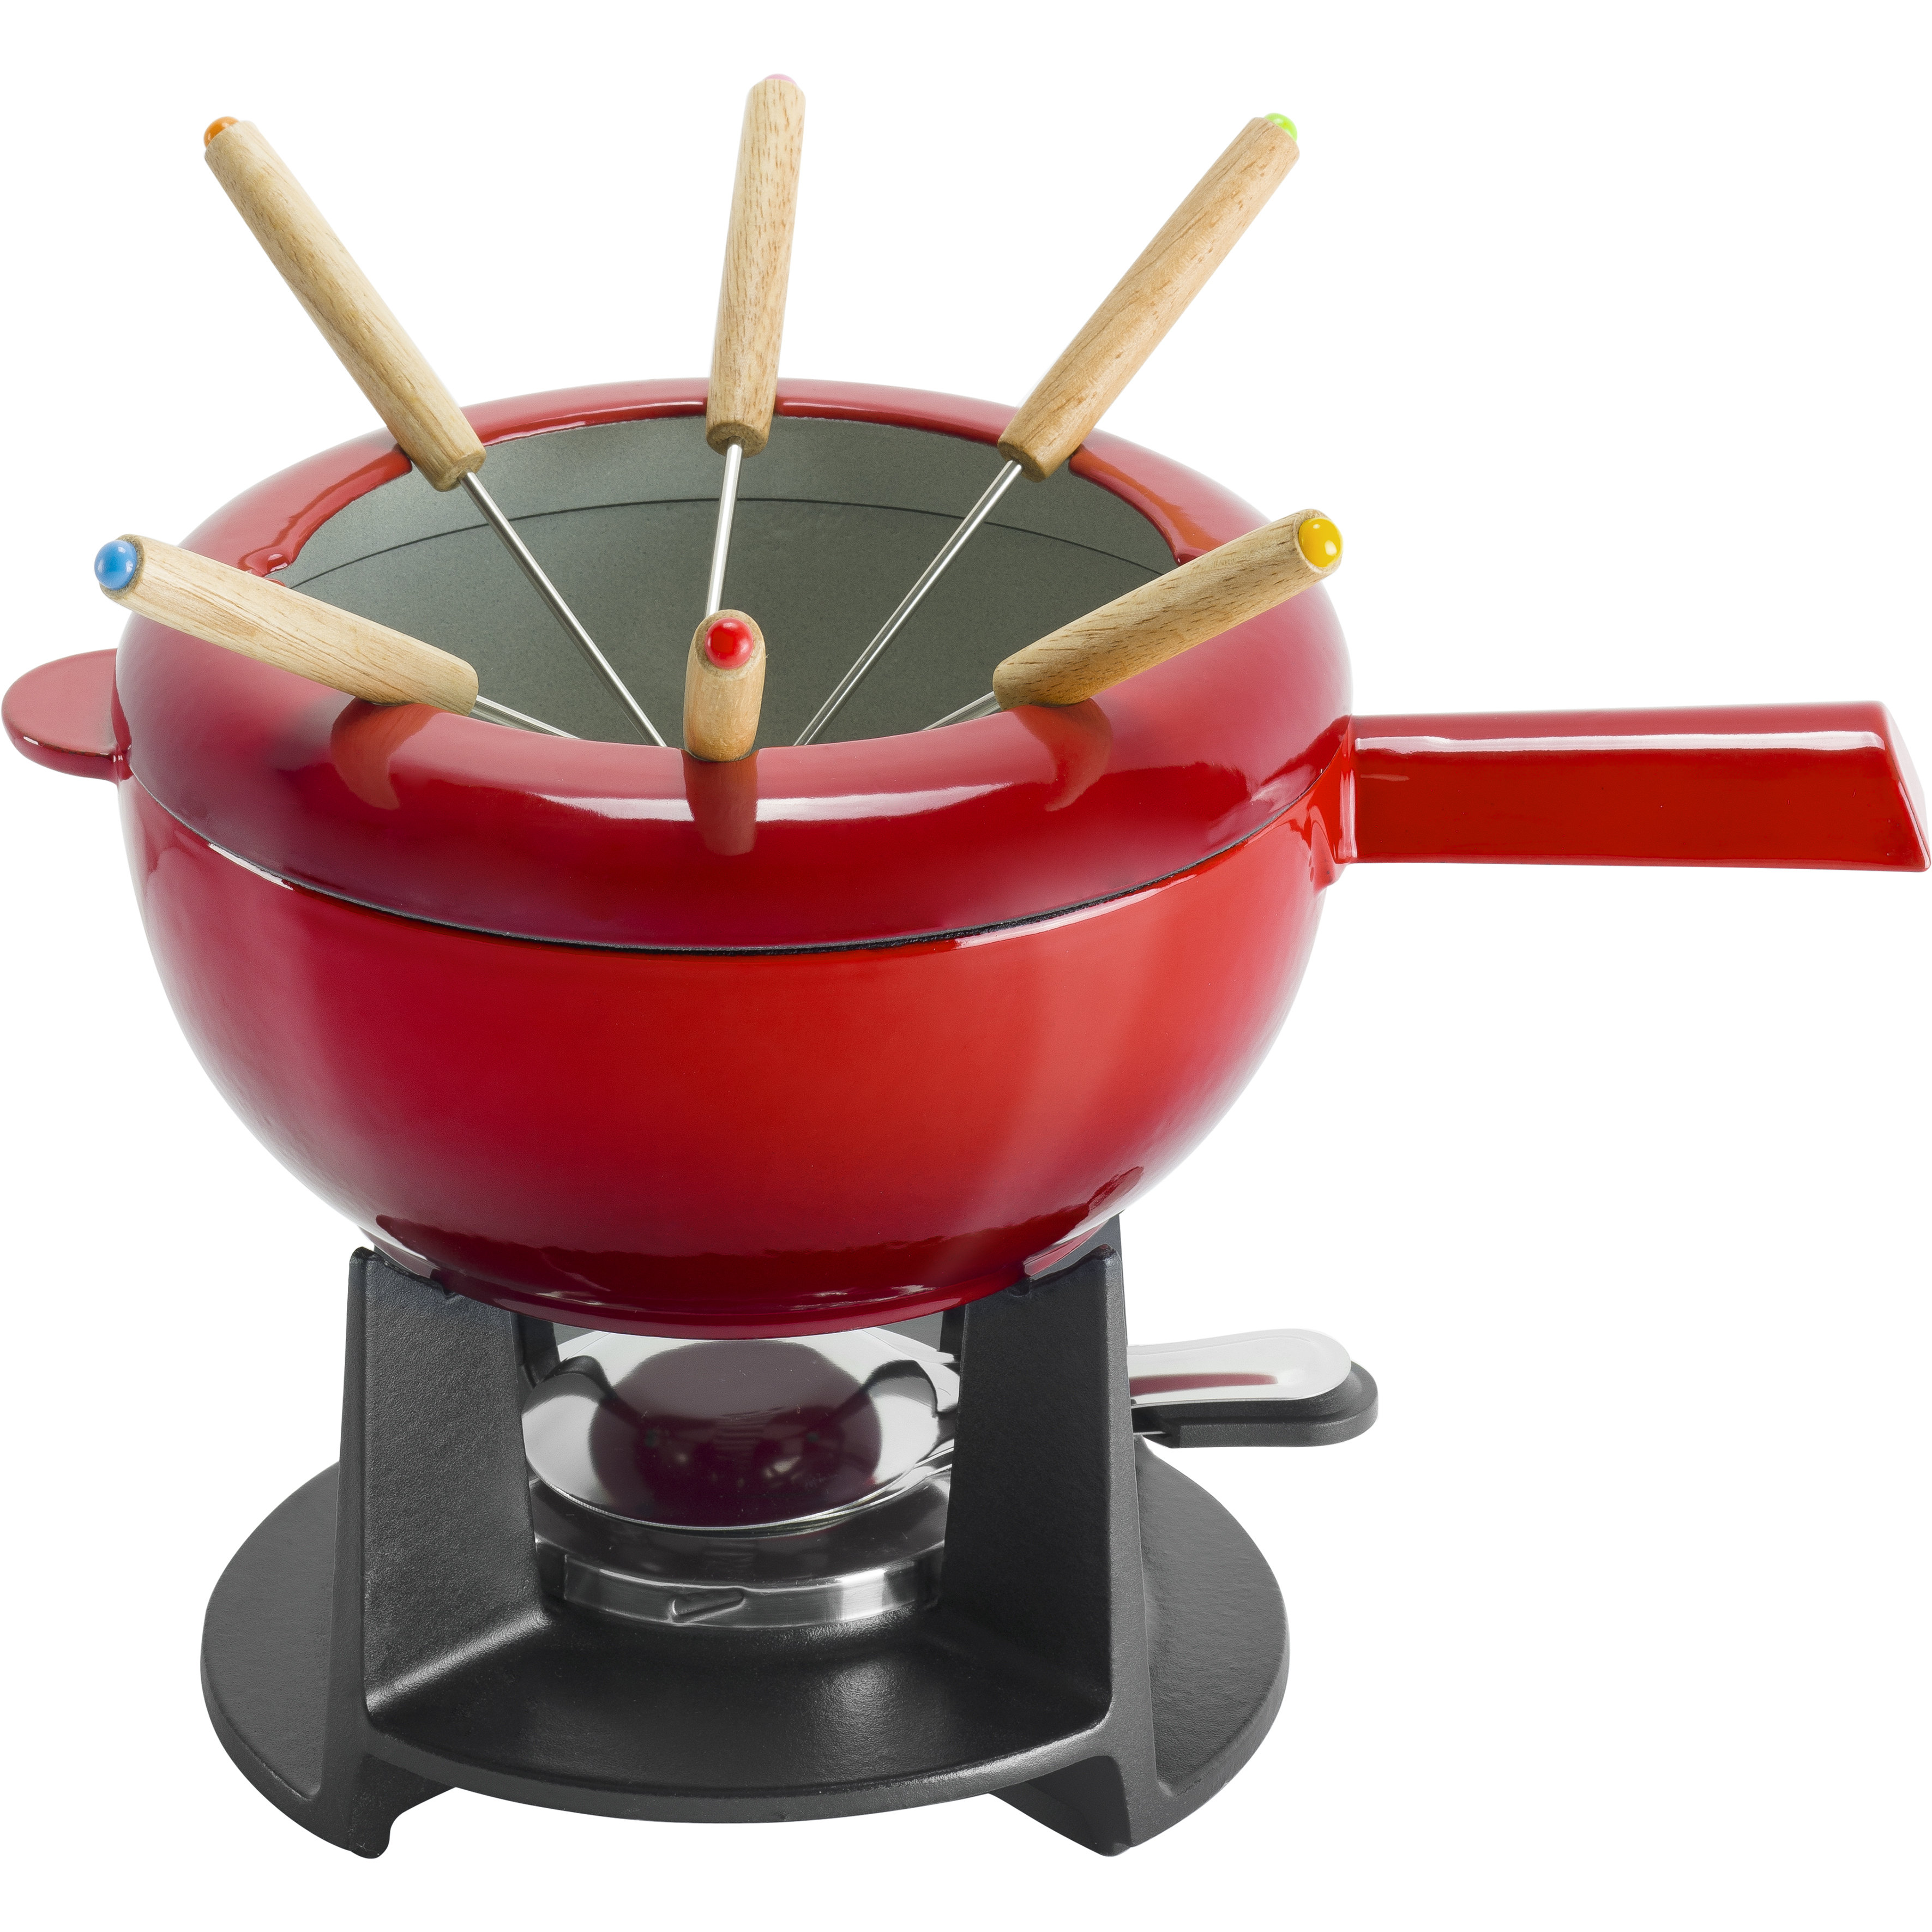 URKNO 11-Piece Cast Iron Fondue Set With Adjustable Burner 6 Colorful  Forks, 5-Cup Cheese Fondue Pot For Chocolate, Caramel, Meat, 4-6 People